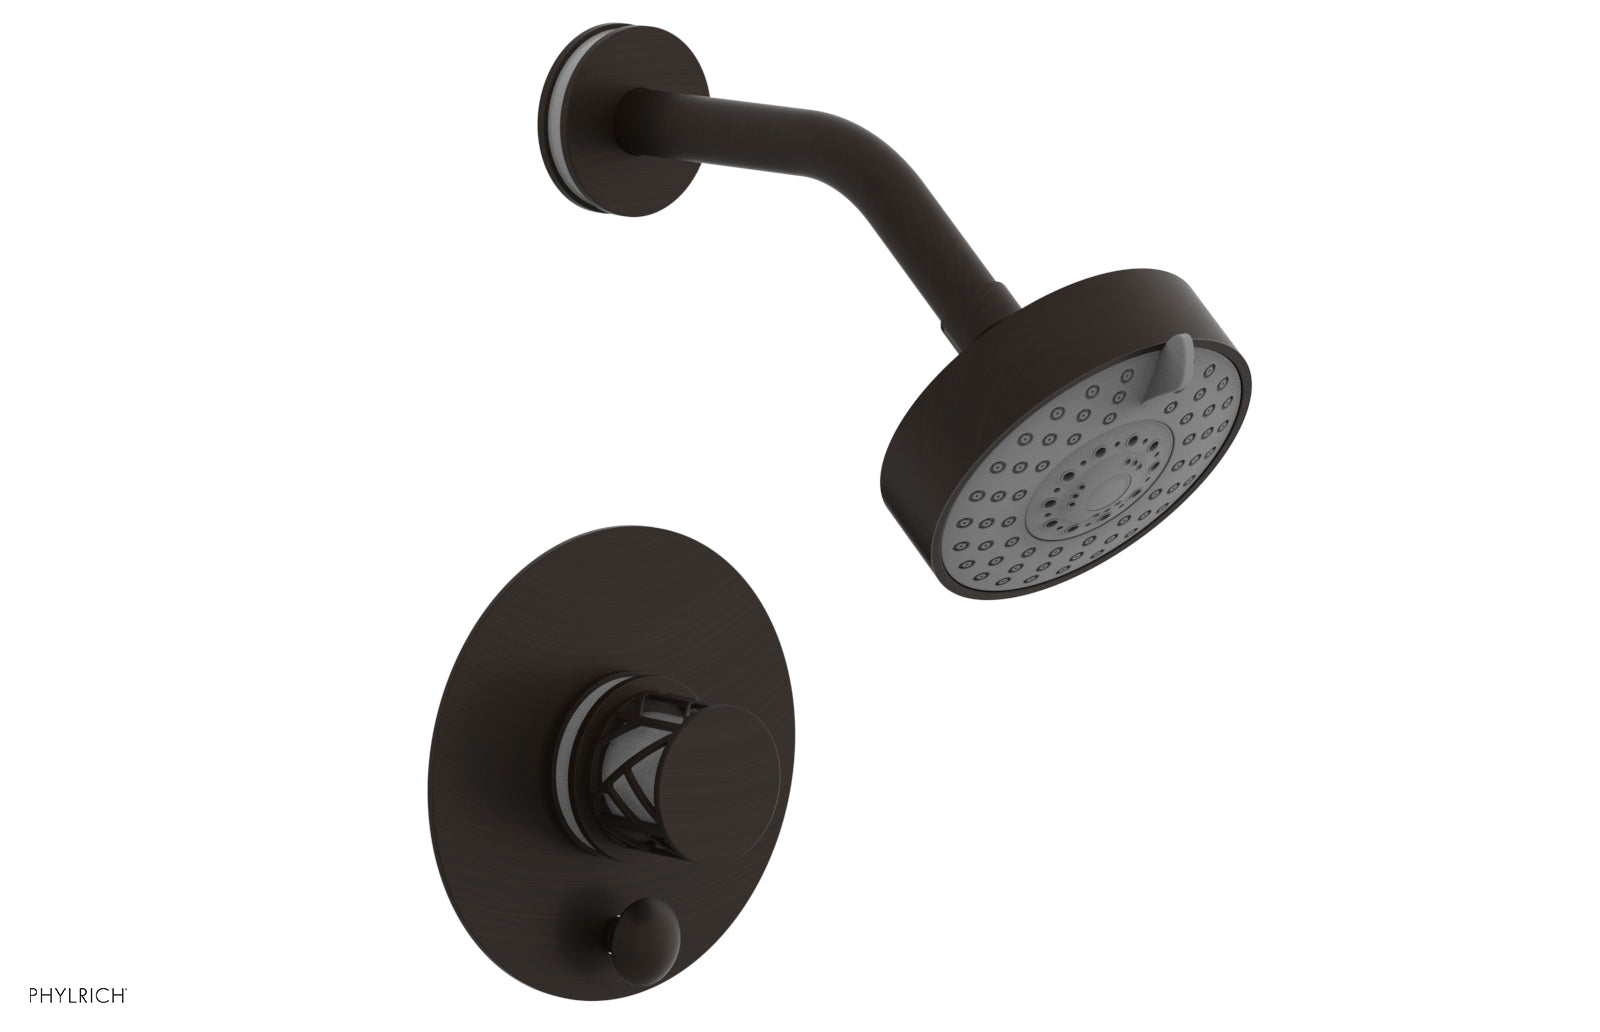 Phylrich JOLIE Pressure Balance Shower and Diverter Set (Less Spout), Round Handle with "White" Accents